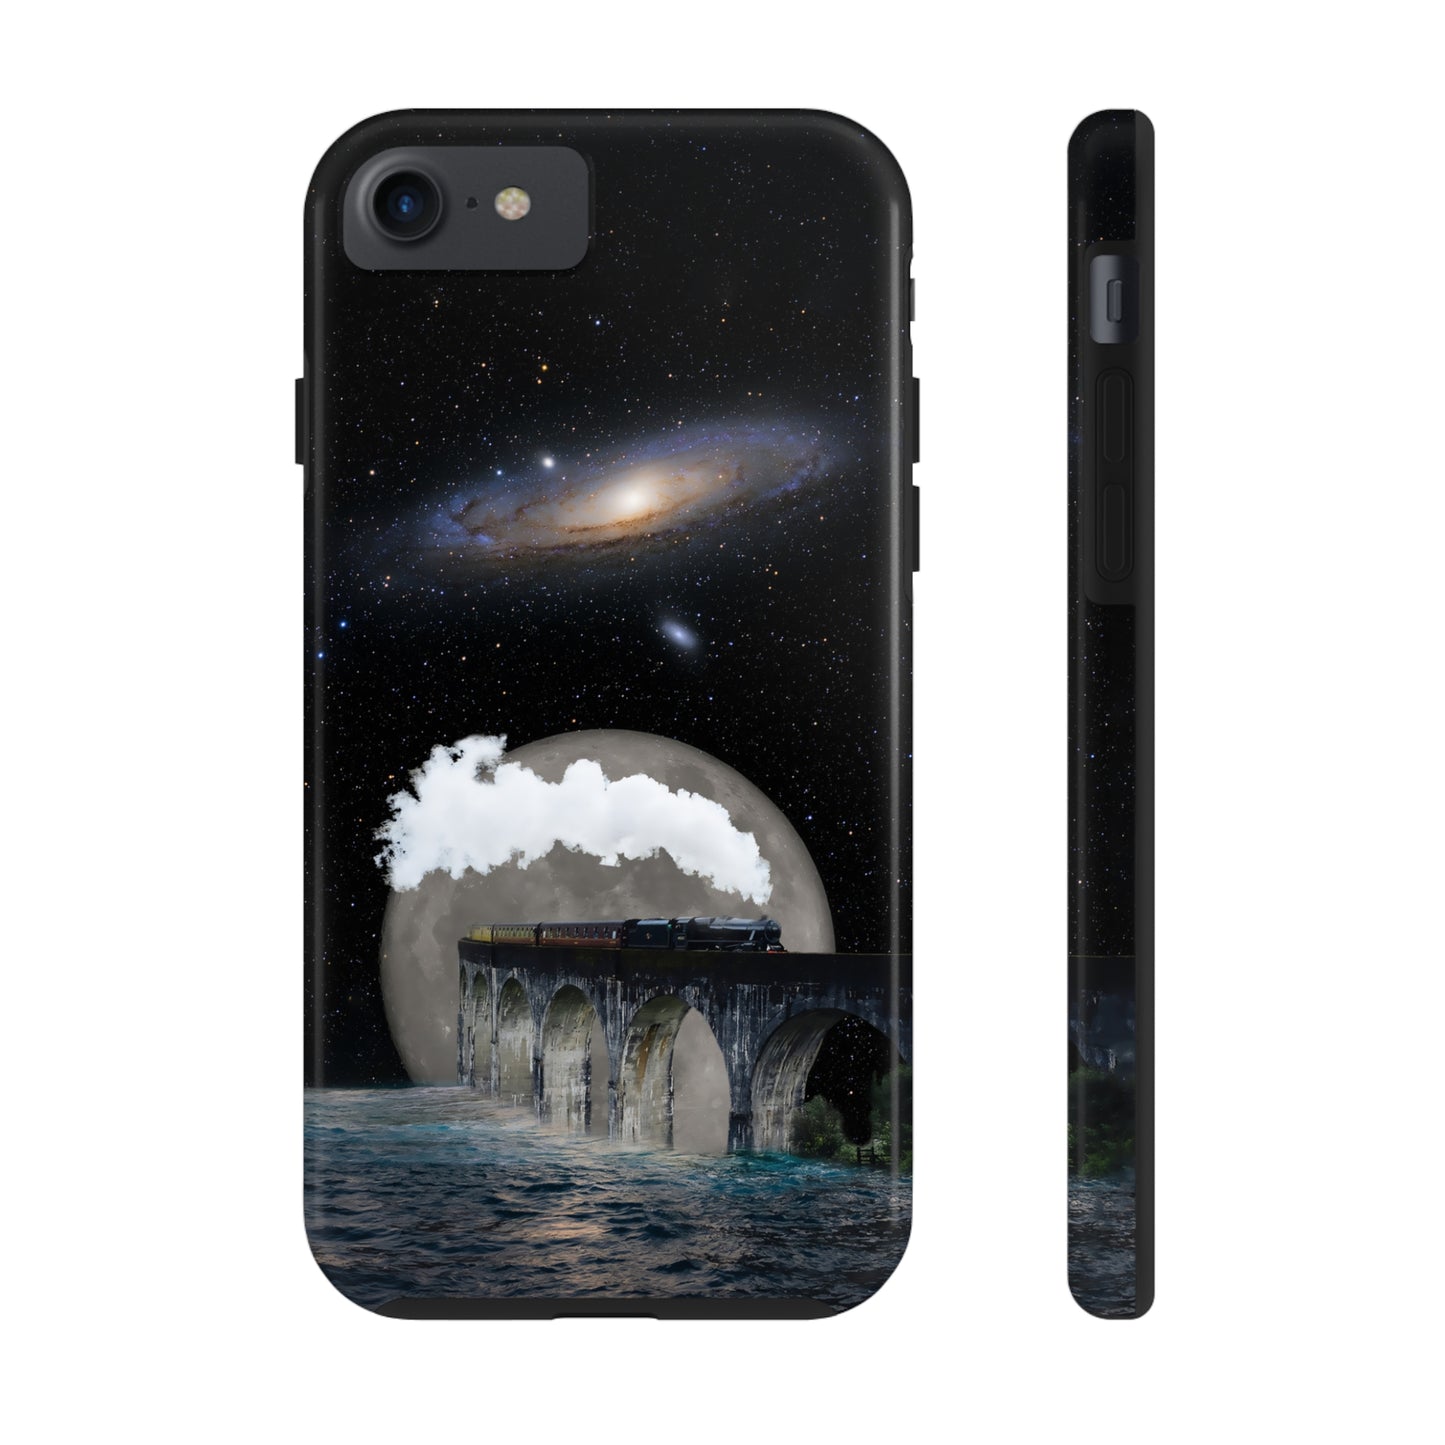 Protective iPhone Cases - Space Collage Art by Tegusuk